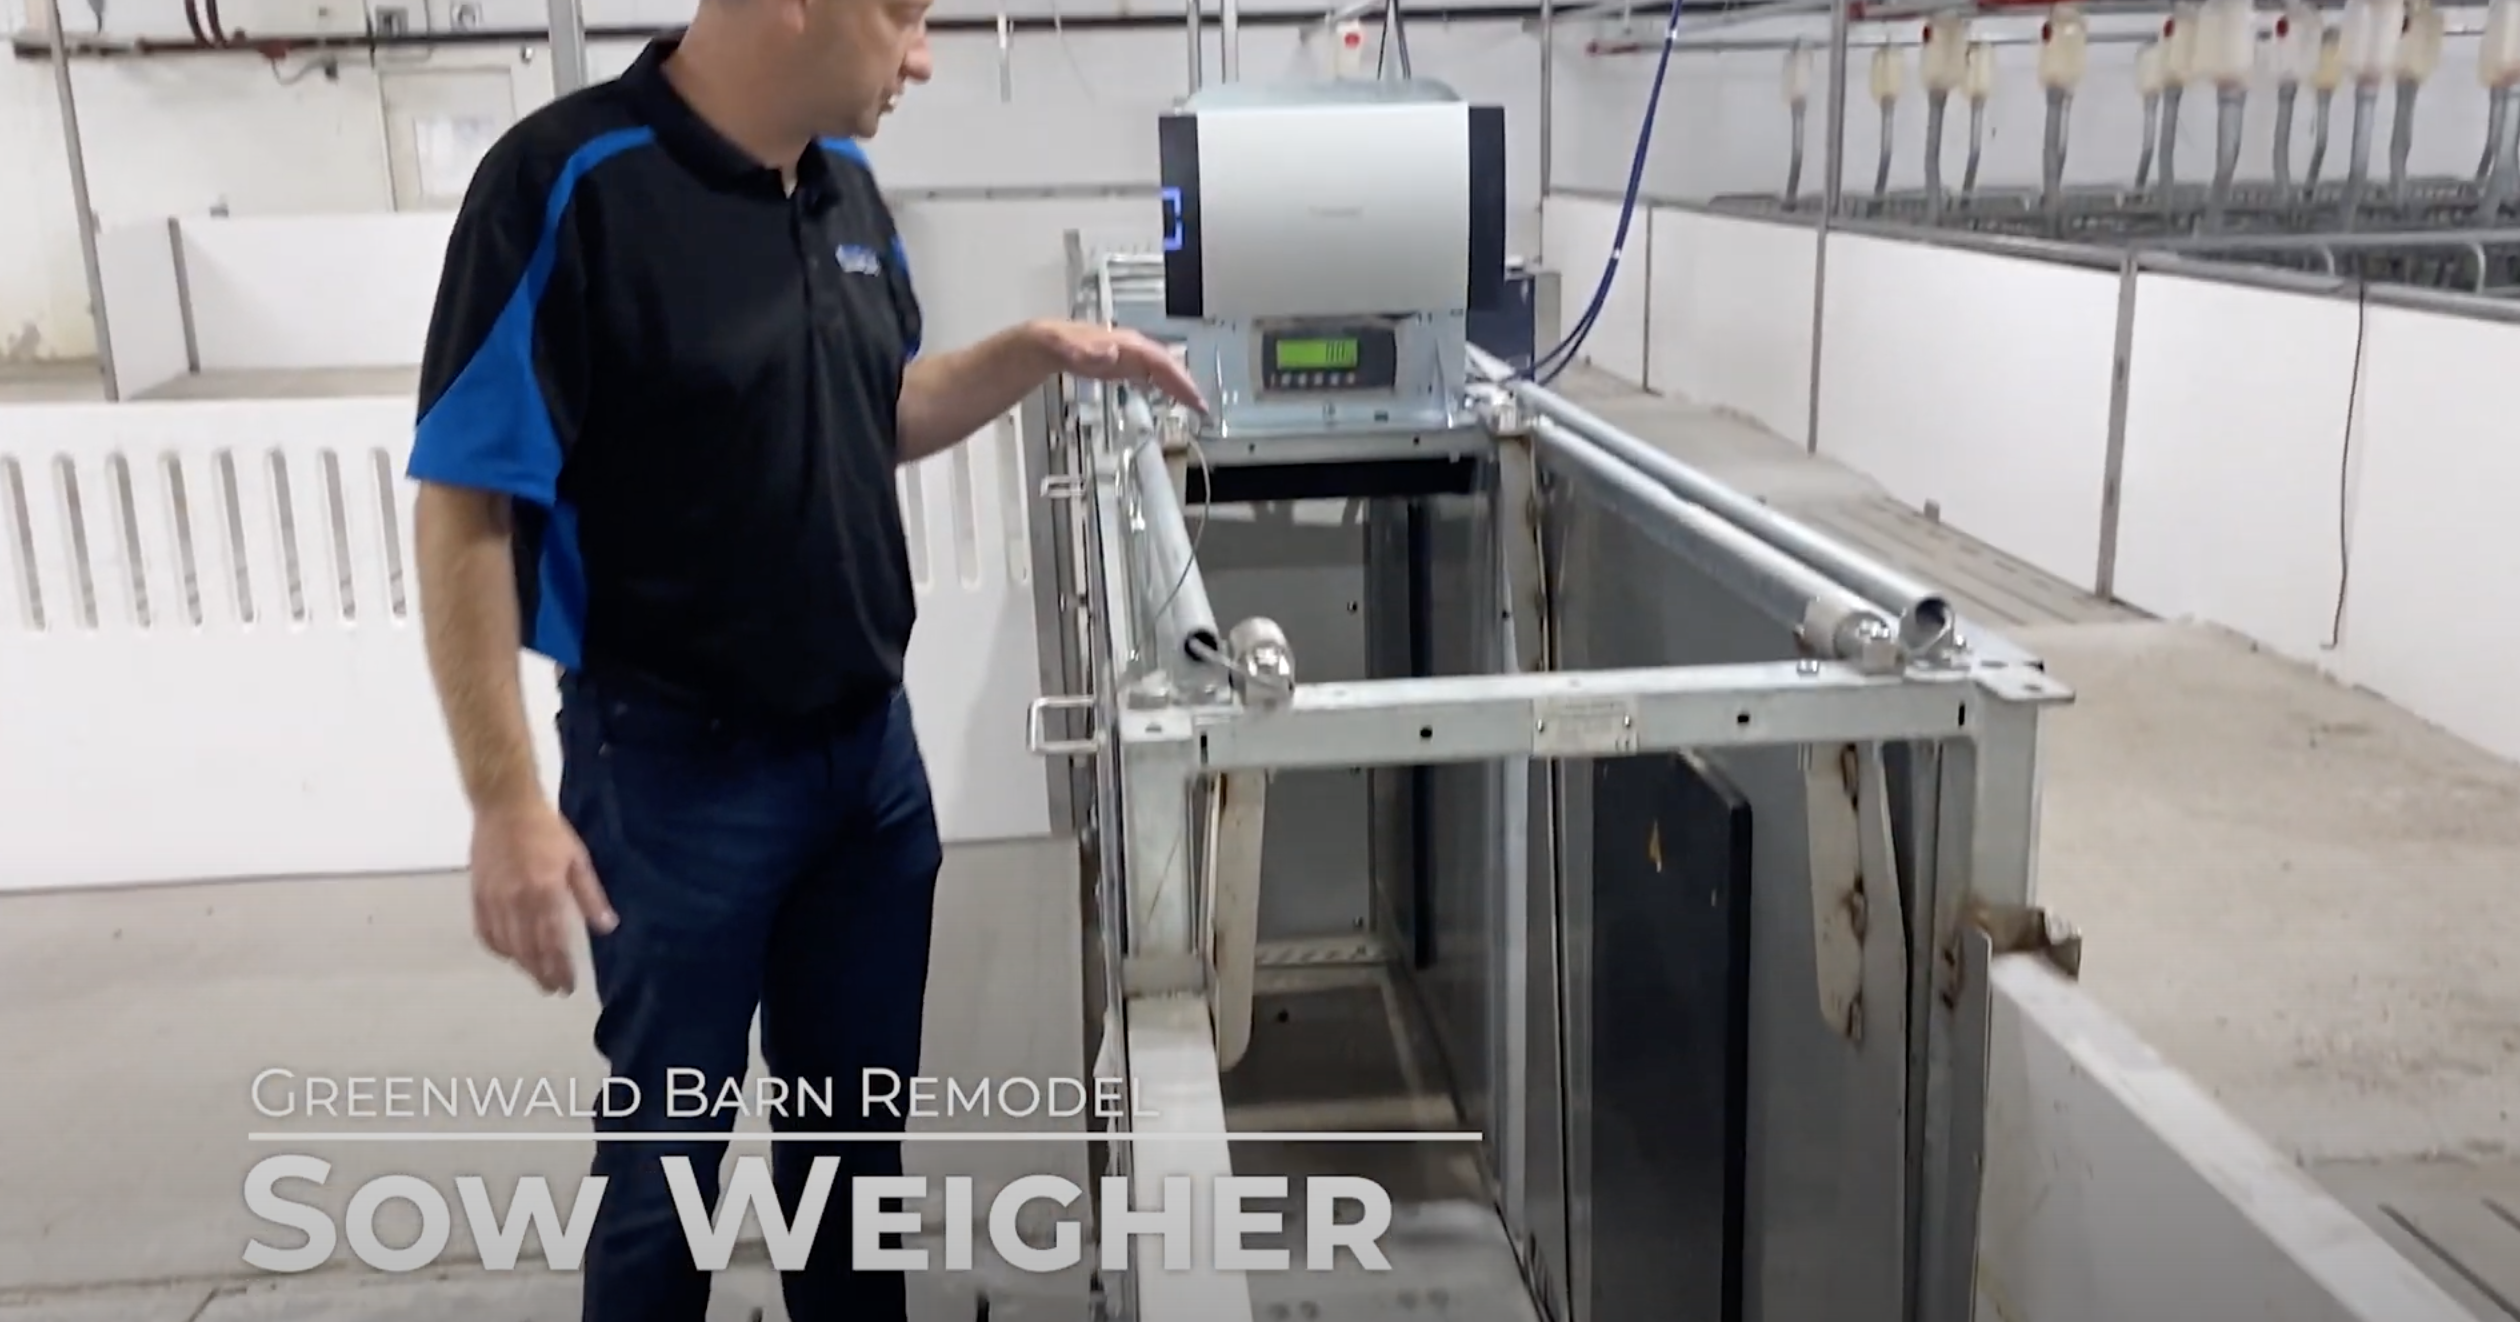 nedap sow weigher in loose sow barn